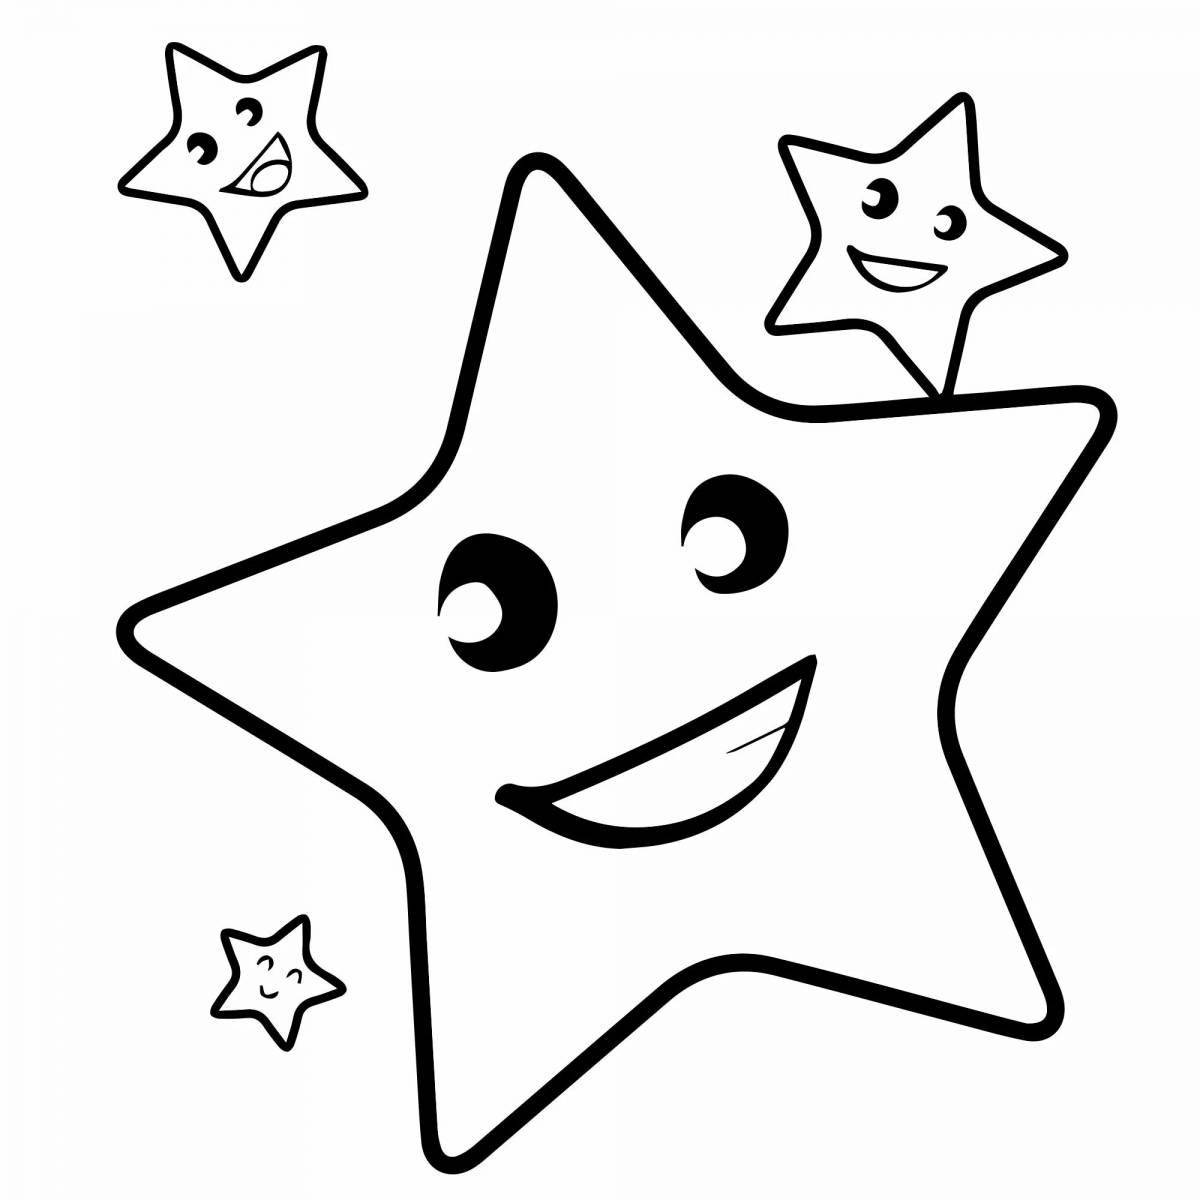 Coloring dreamy little stars